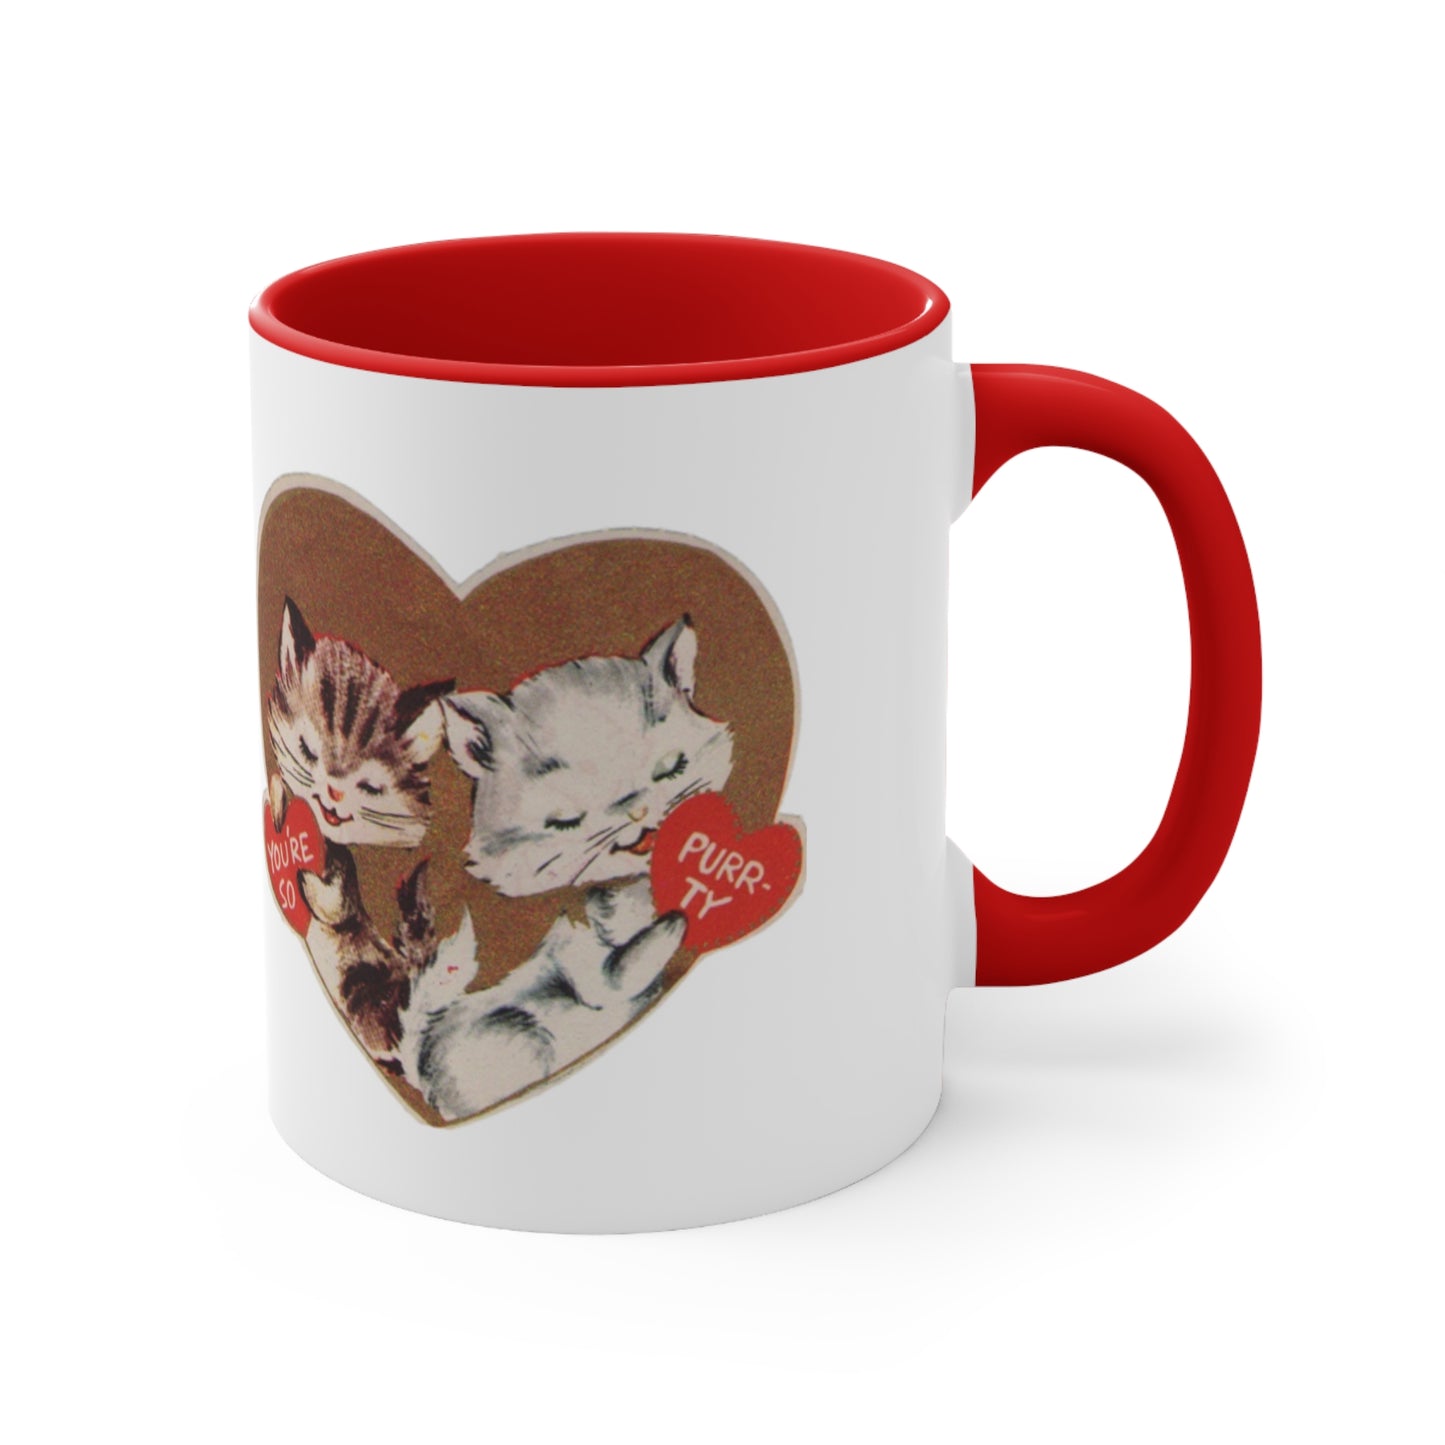 You're so purrty vintage kitty cat valentines mug